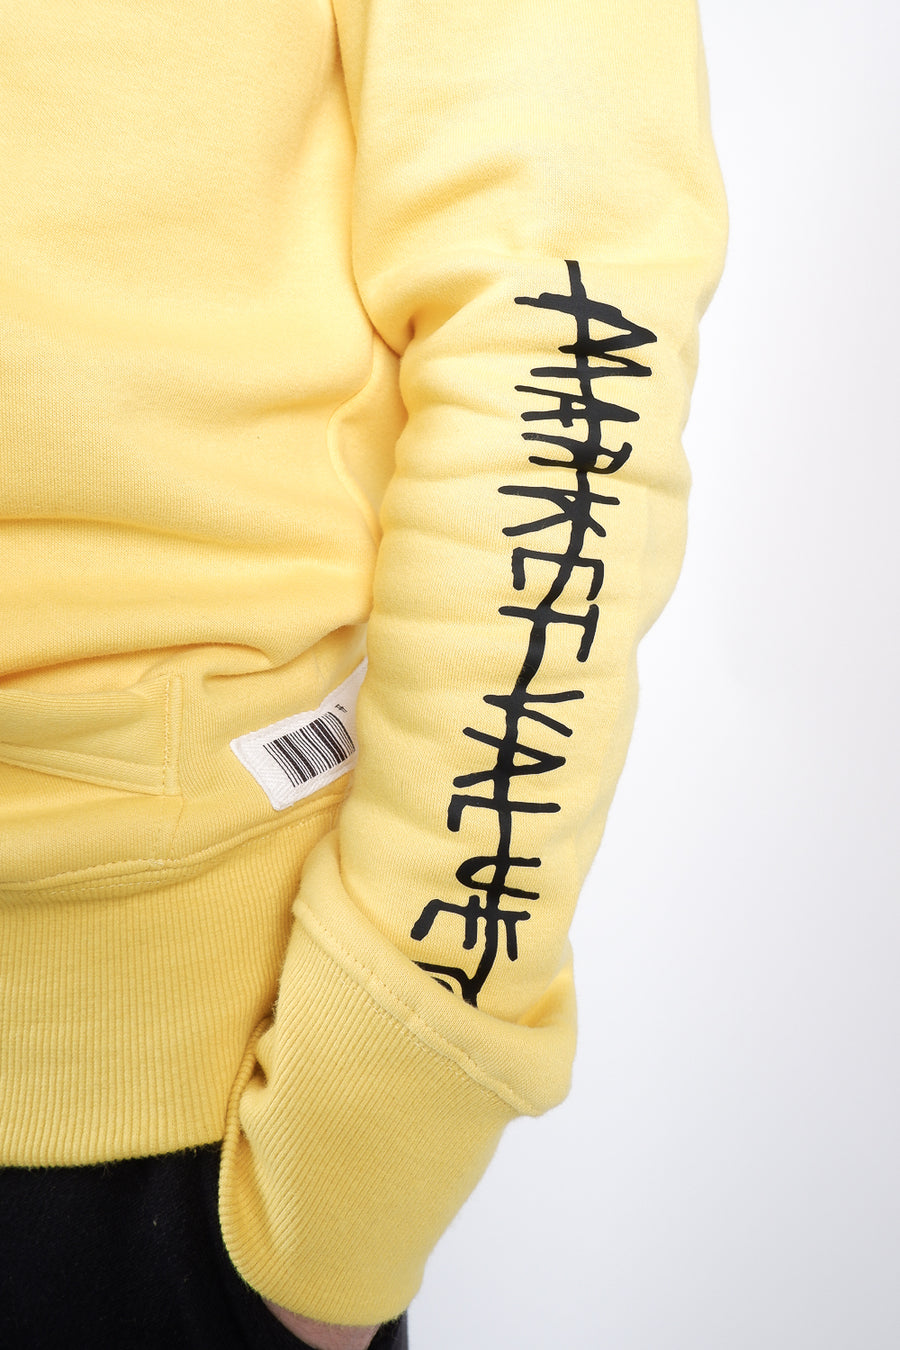 Buy the ABE King Pleasure Hoodie in Yellow at Intro. Spend £50 for free UK delivery. Official stockists. We ship worldwide.